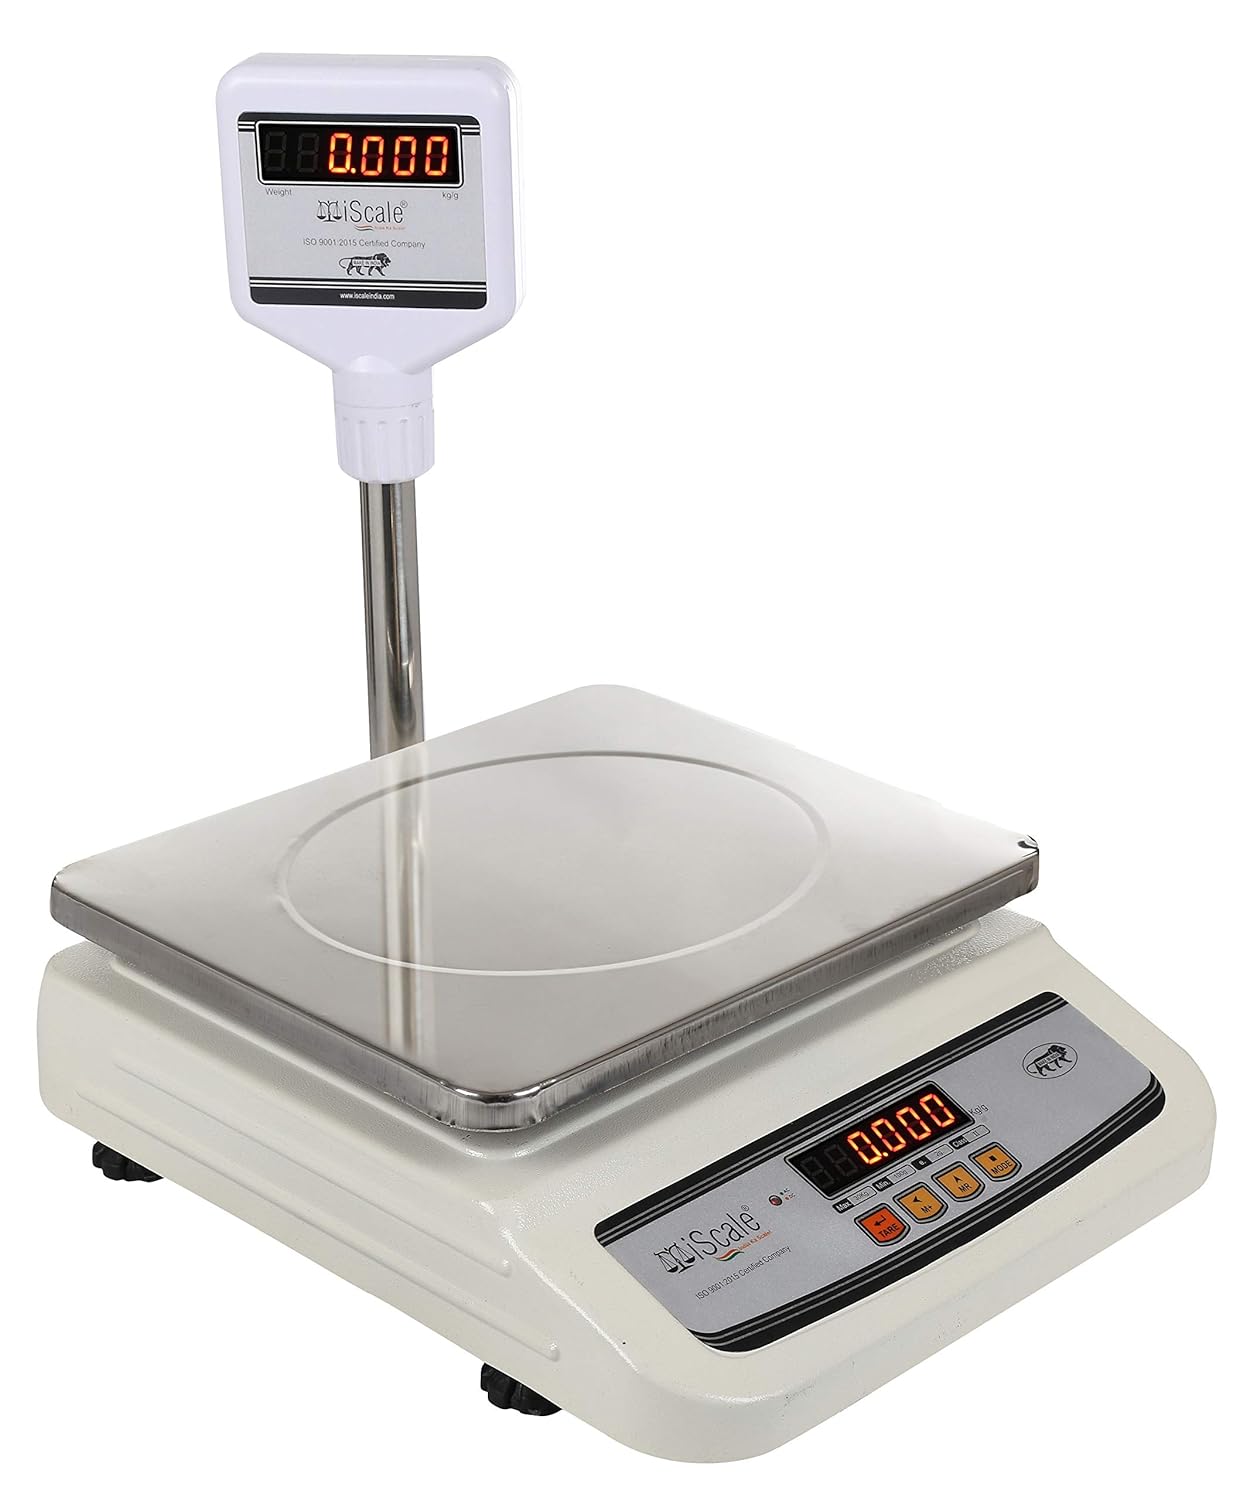 A scale weighing two phrases